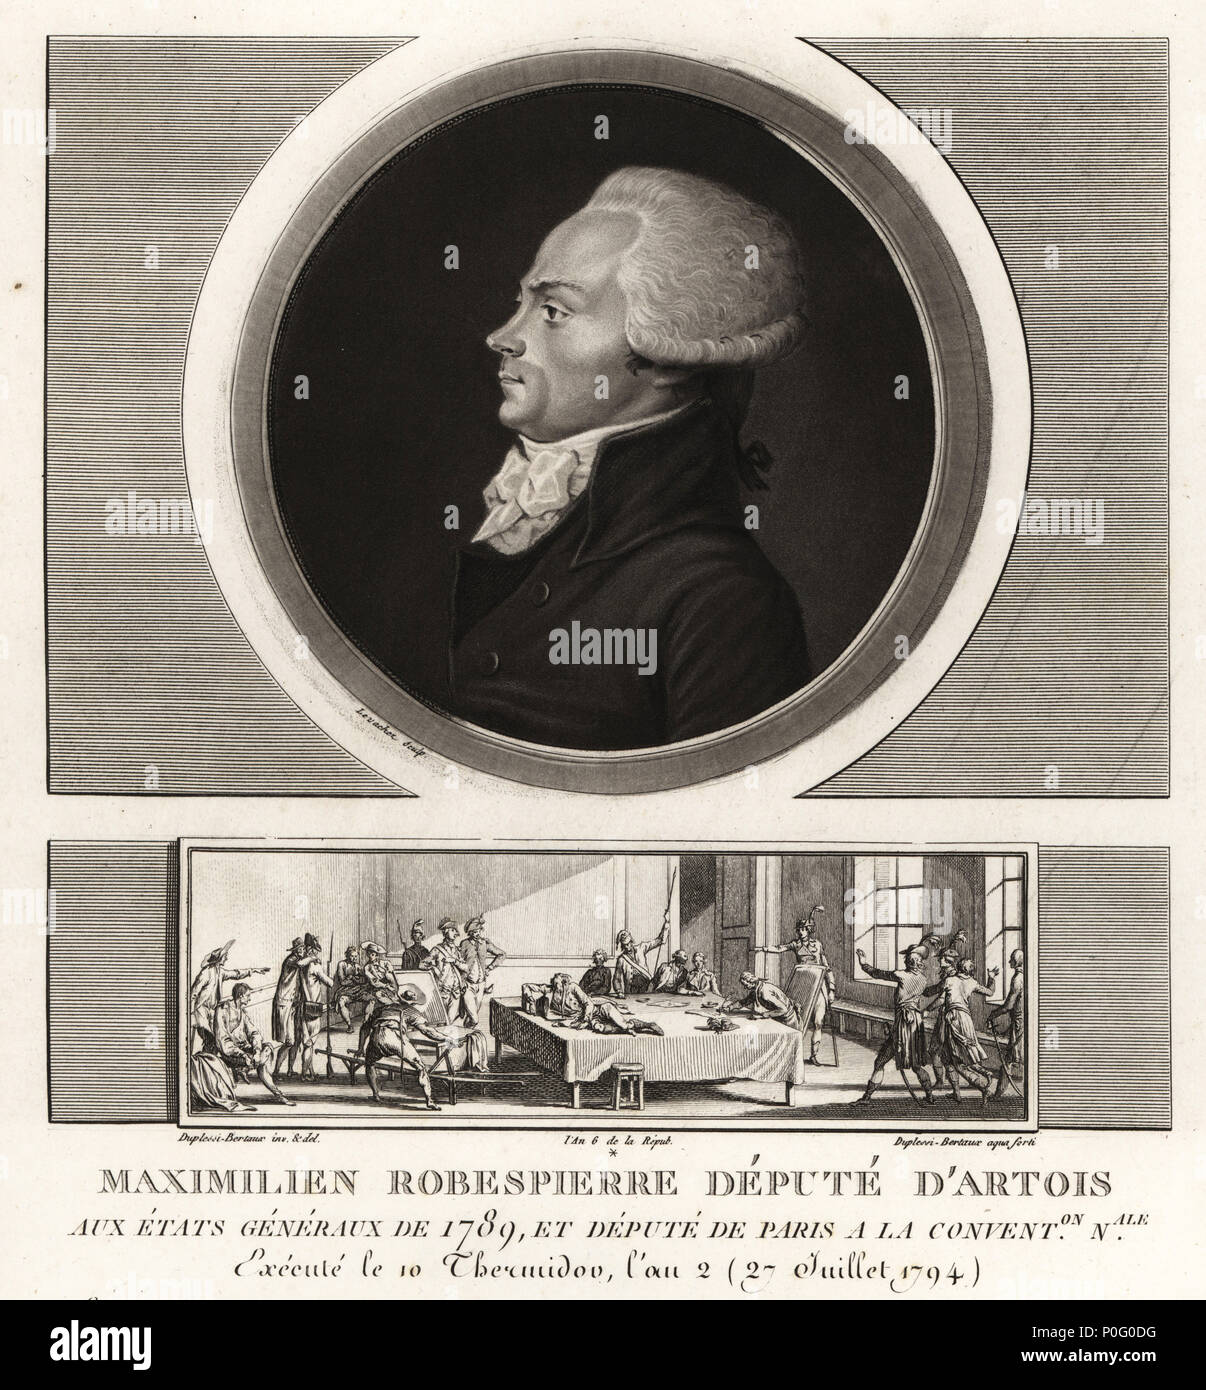 Maximilien Robespierre, Deputy of Artois, executed 1794. Vignette shows the wounded Robespierre lying on a table in a room of the Committee of Public Safety, 9th Thermidor 1794.  Mezzotint drawn and engraved by Jean Duplessis-Bertaux from his Collection Complete de 60 Portraits des Personnages qui ont le plus Figure dans la Revolution Francaise, Auber, Pairs, 1800. Portrait engraved by Charles Francois Gabriel Levachez. Stock Photo